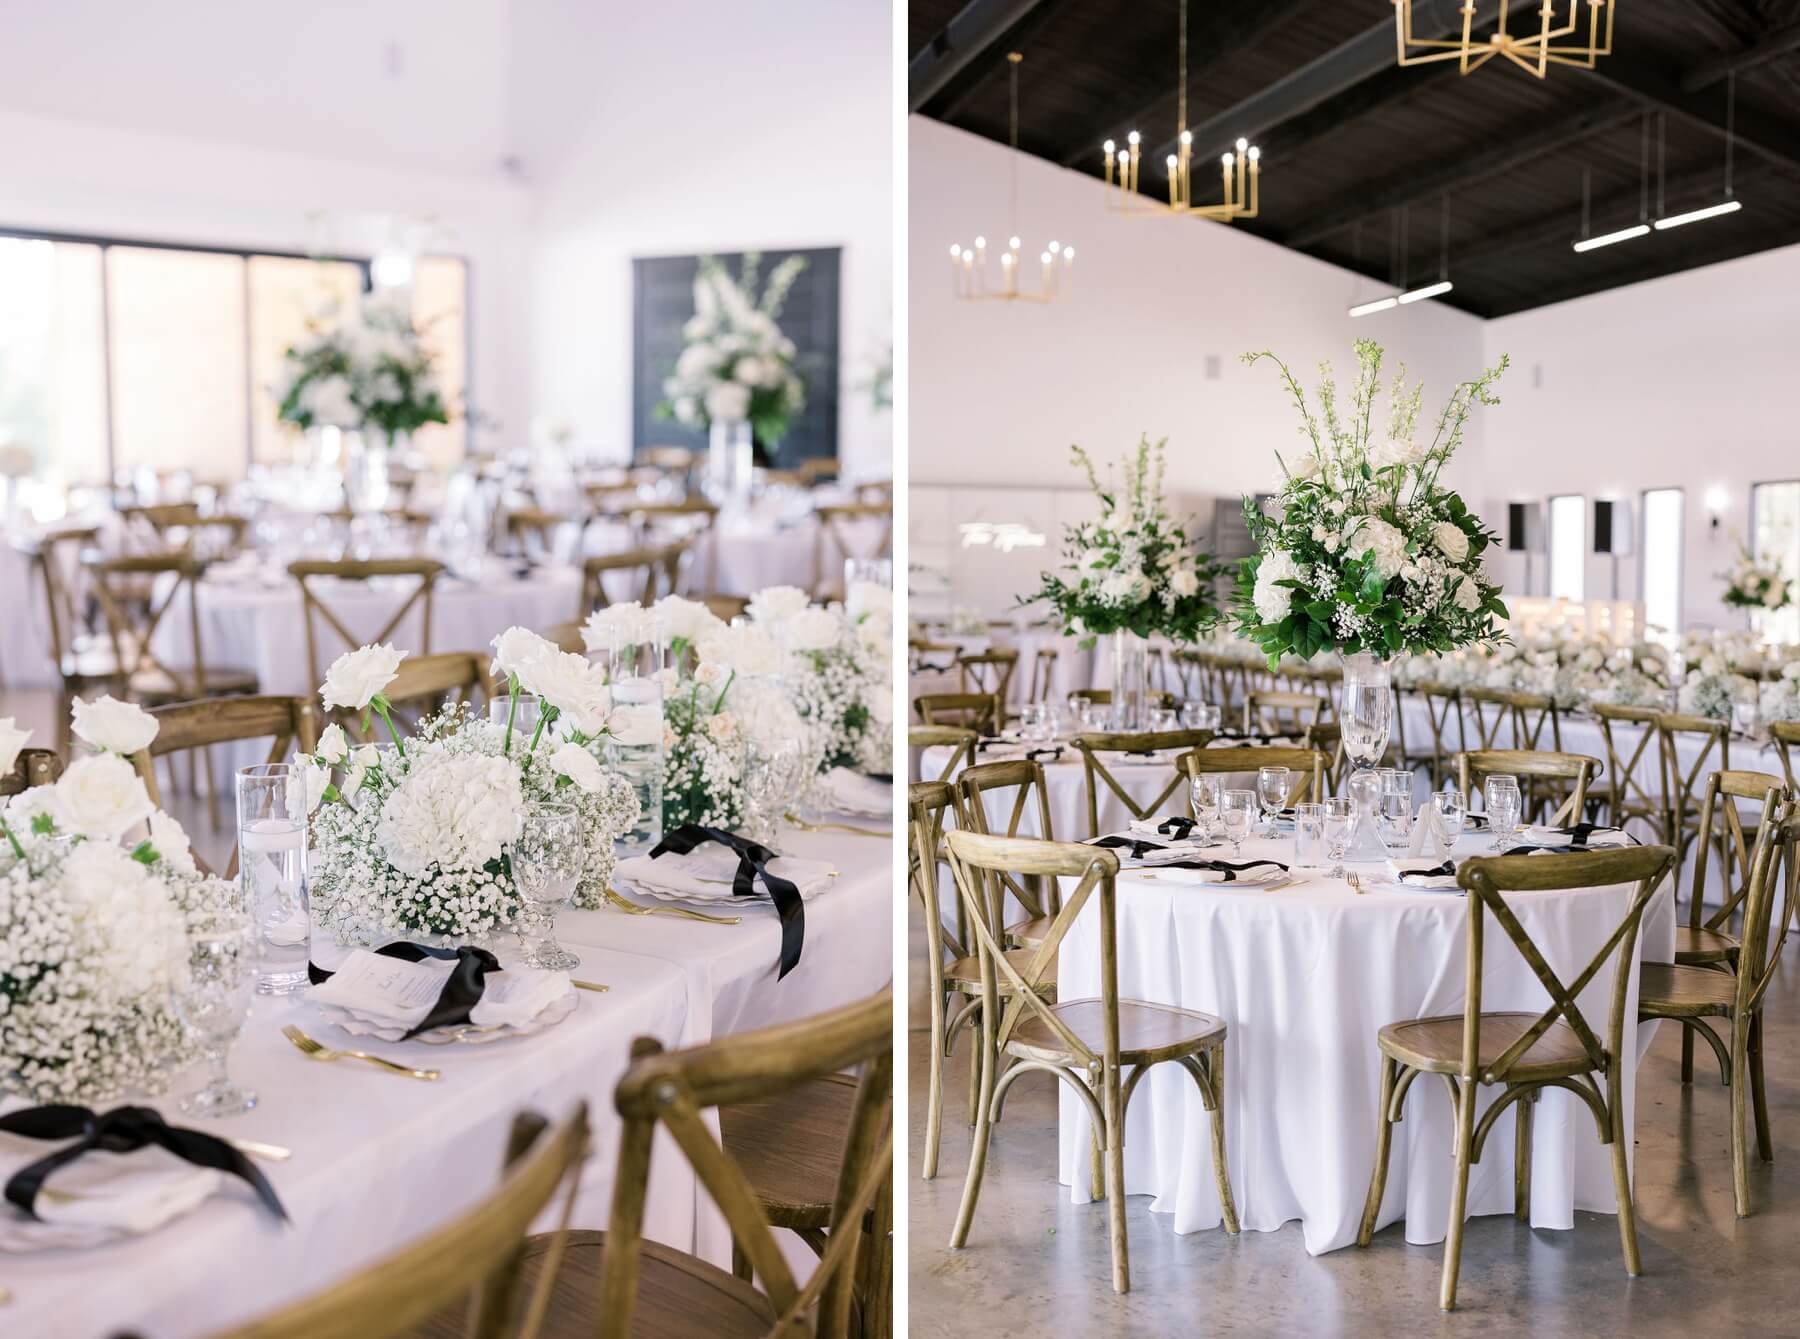 White floral arrangements with baby's breath, roses, hydrangeas, and greenery at tables with cross back chairs at Union House TX